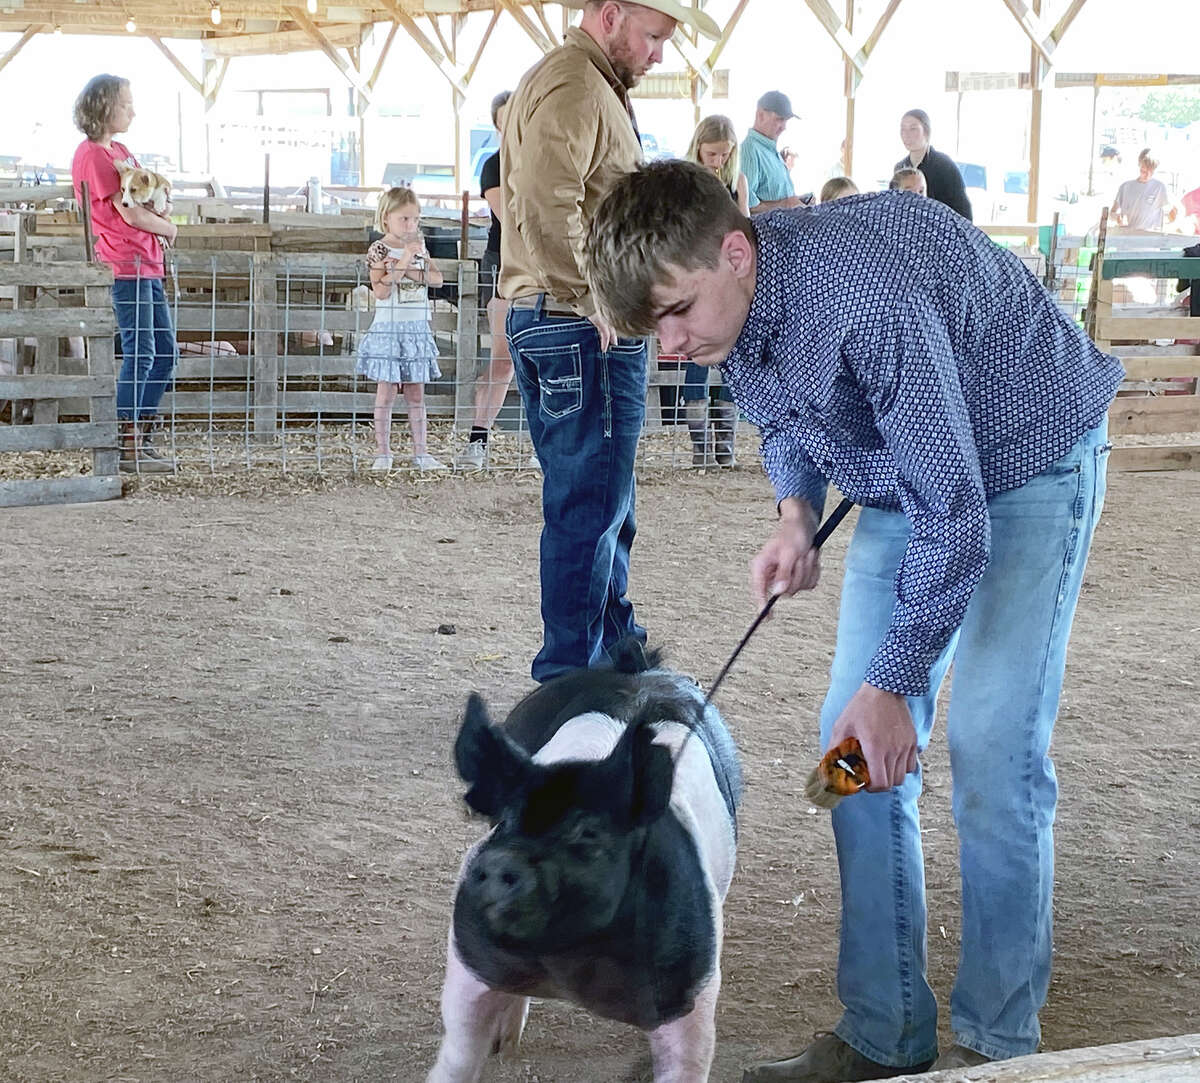 Bluffs FFA chapter member Zack Evans attends the Section 13 VoAg Fair on June 3 in Carrollton and showed at the Greene County Fairgrounds. Evans, who keeps his supervised agricultural experience on swine production, showed his pigs. Zack won reserved champion with his January gilt and grand champion in showmanship. 